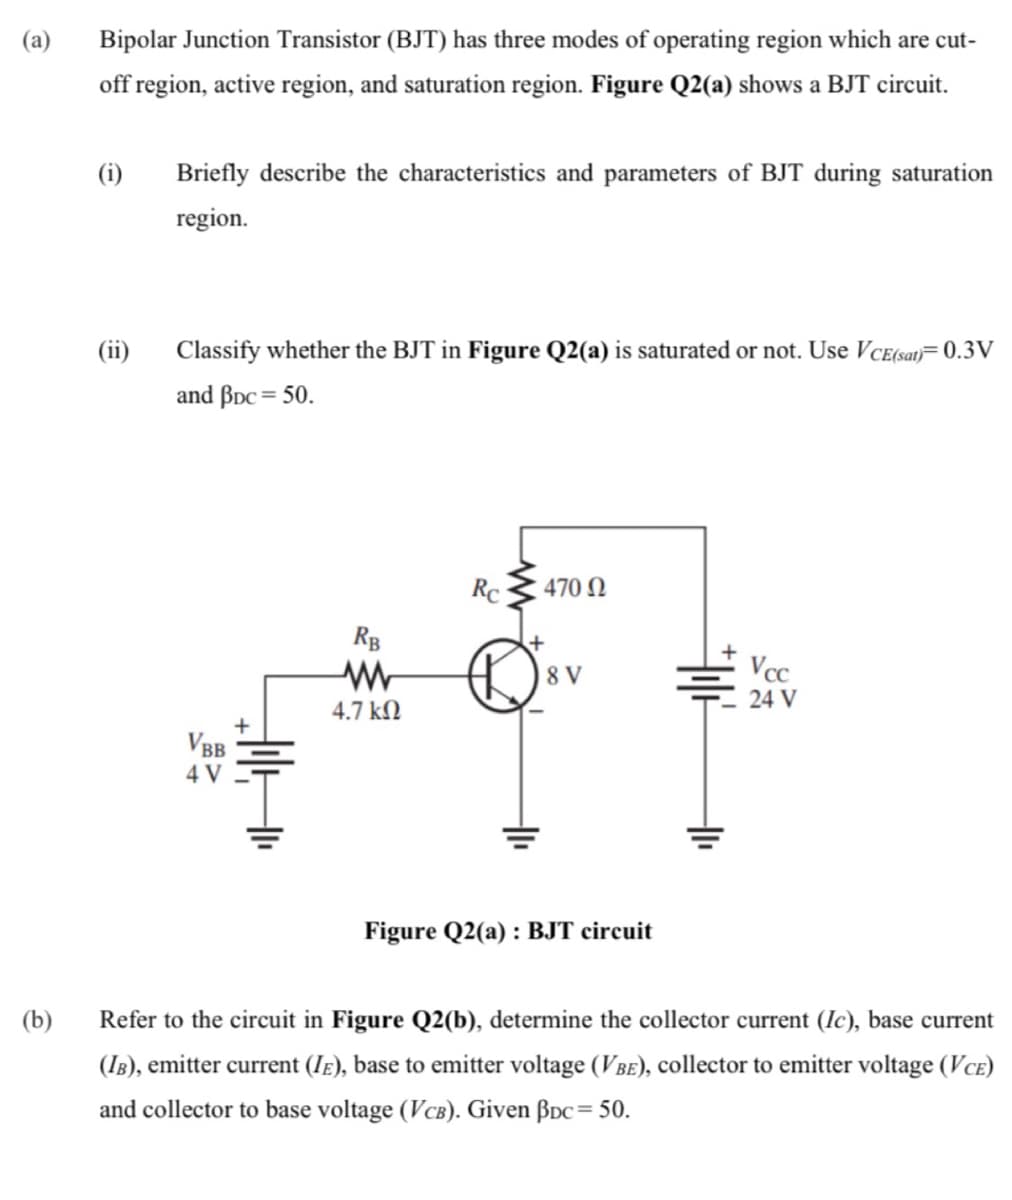 (a)
Bipolar Junction Transistor (BJT) has three modes of operating region which are cut-
off region, active region, and saturation region. Figure Q2(a) shows a BJT circuit.
(i)
Briefly describe the characteristics and parameters of BJT during saturation
region.
(ii)
Classify whether the BJT in Figure Q2(a) is saturated or not. Use VcE(sat)= 0.3V
and BDc = 50.
Rc
470 N
RB
8 V
Vcc
24 V
4.7 kN
VBB
4 V
Figure Q2(a) : BJT circuit
(b)
Refer to the circuit in Figure Q2(b), determine the collector current (Ic), base current
(IB), emitter current (Ie), base to emitter voltage (VBE), collector to emitter voltage (VcE)
and collector to base voltage (VcB). Given BDc= 50.
